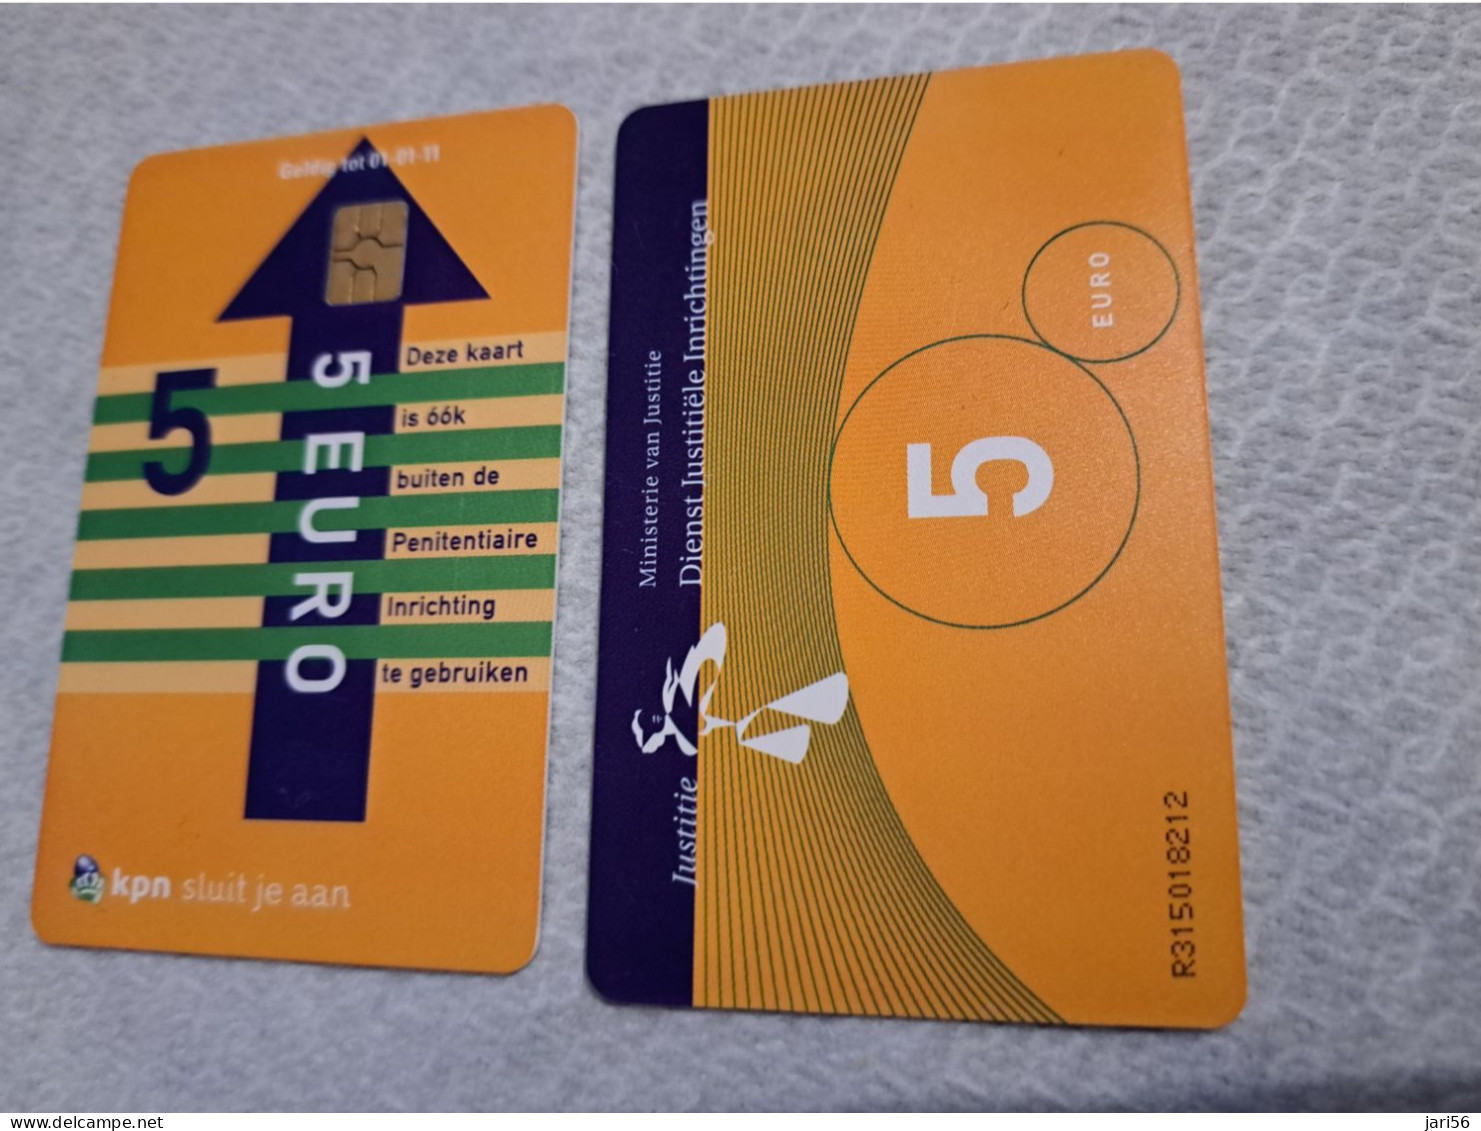 NETHERLANDS   € 5,-  ,-  / USED  / DATE  01-01-11  JUSTITIE/PRISON CARD  CHIP CARD/ USED   ** 16146** - Schede GSM, Prepagate E Ricariche